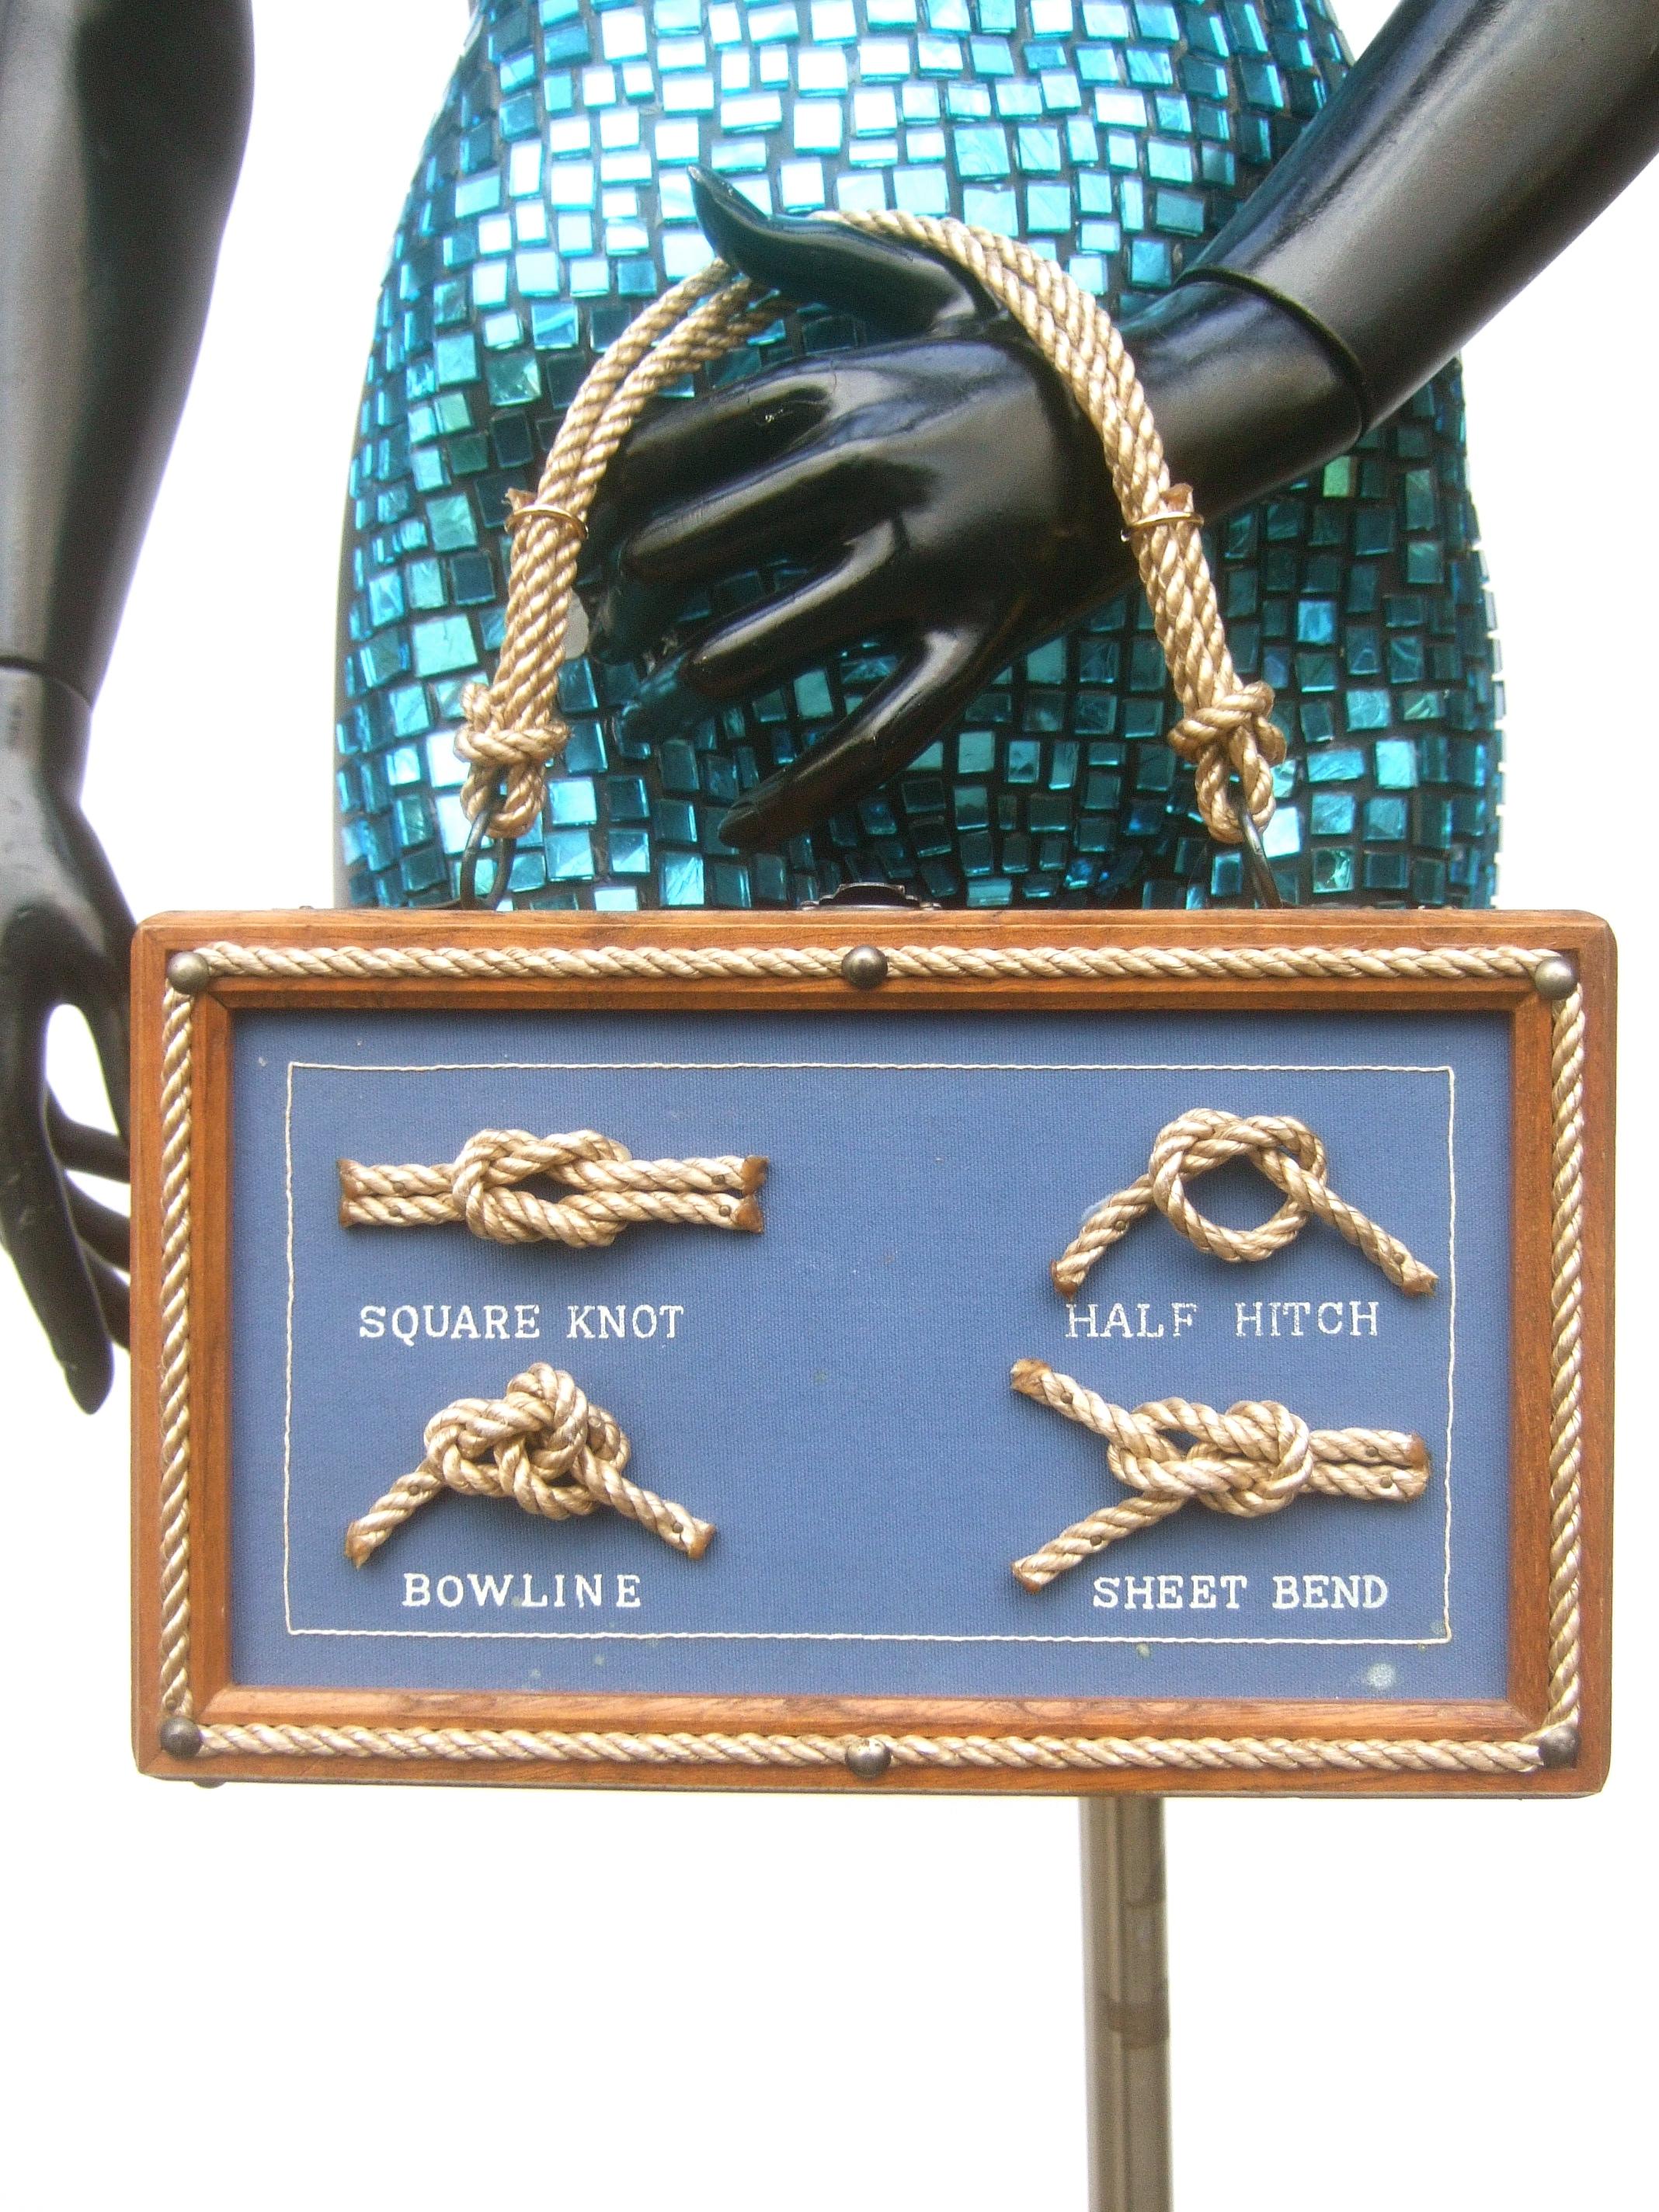 1970's Whimsical nautical rope wood box purse 
The quirky retro wood box purse is designed with four types
of rope knots on the front exterior; a square knot, half hitch, bowline & sheet bend; set against a blue background
Framed with a rope border.